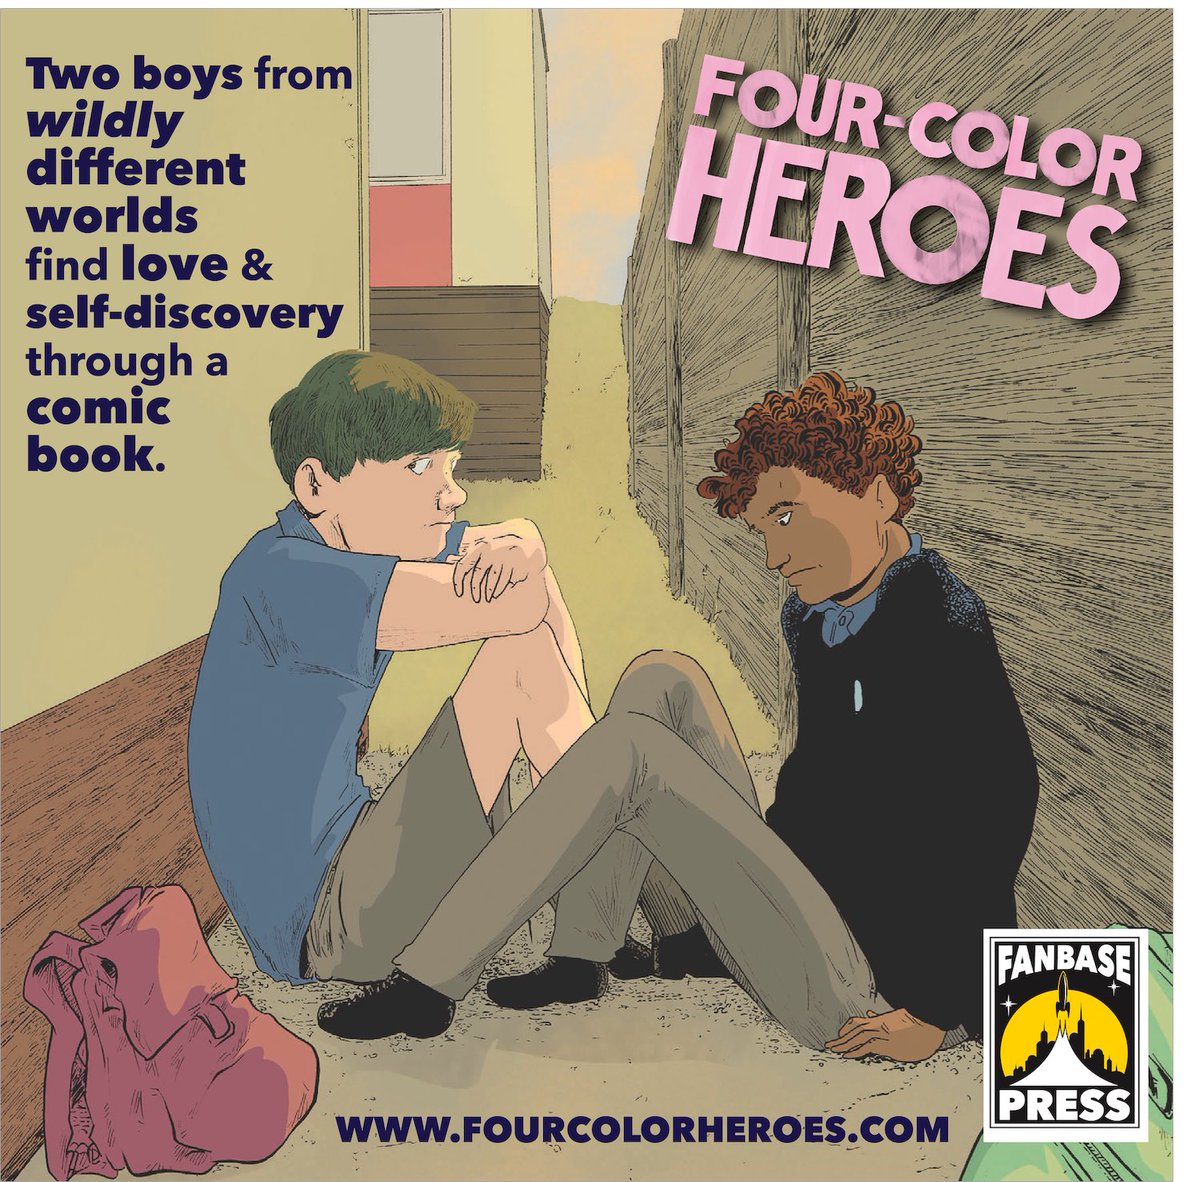 .@RichardFairgray's #GLAAD-winning coming-of-age #GraphicNovel, @4ColorHeroesGN, follows 2 boys from wildly different worlds who find love & self-discovery through #comics. On @Fanbase_Press @hooplaDigital & @comicsplus #GraphicMedicine #LGBTQIA fanbasepress.ecrater.com/p/42007307/fou…